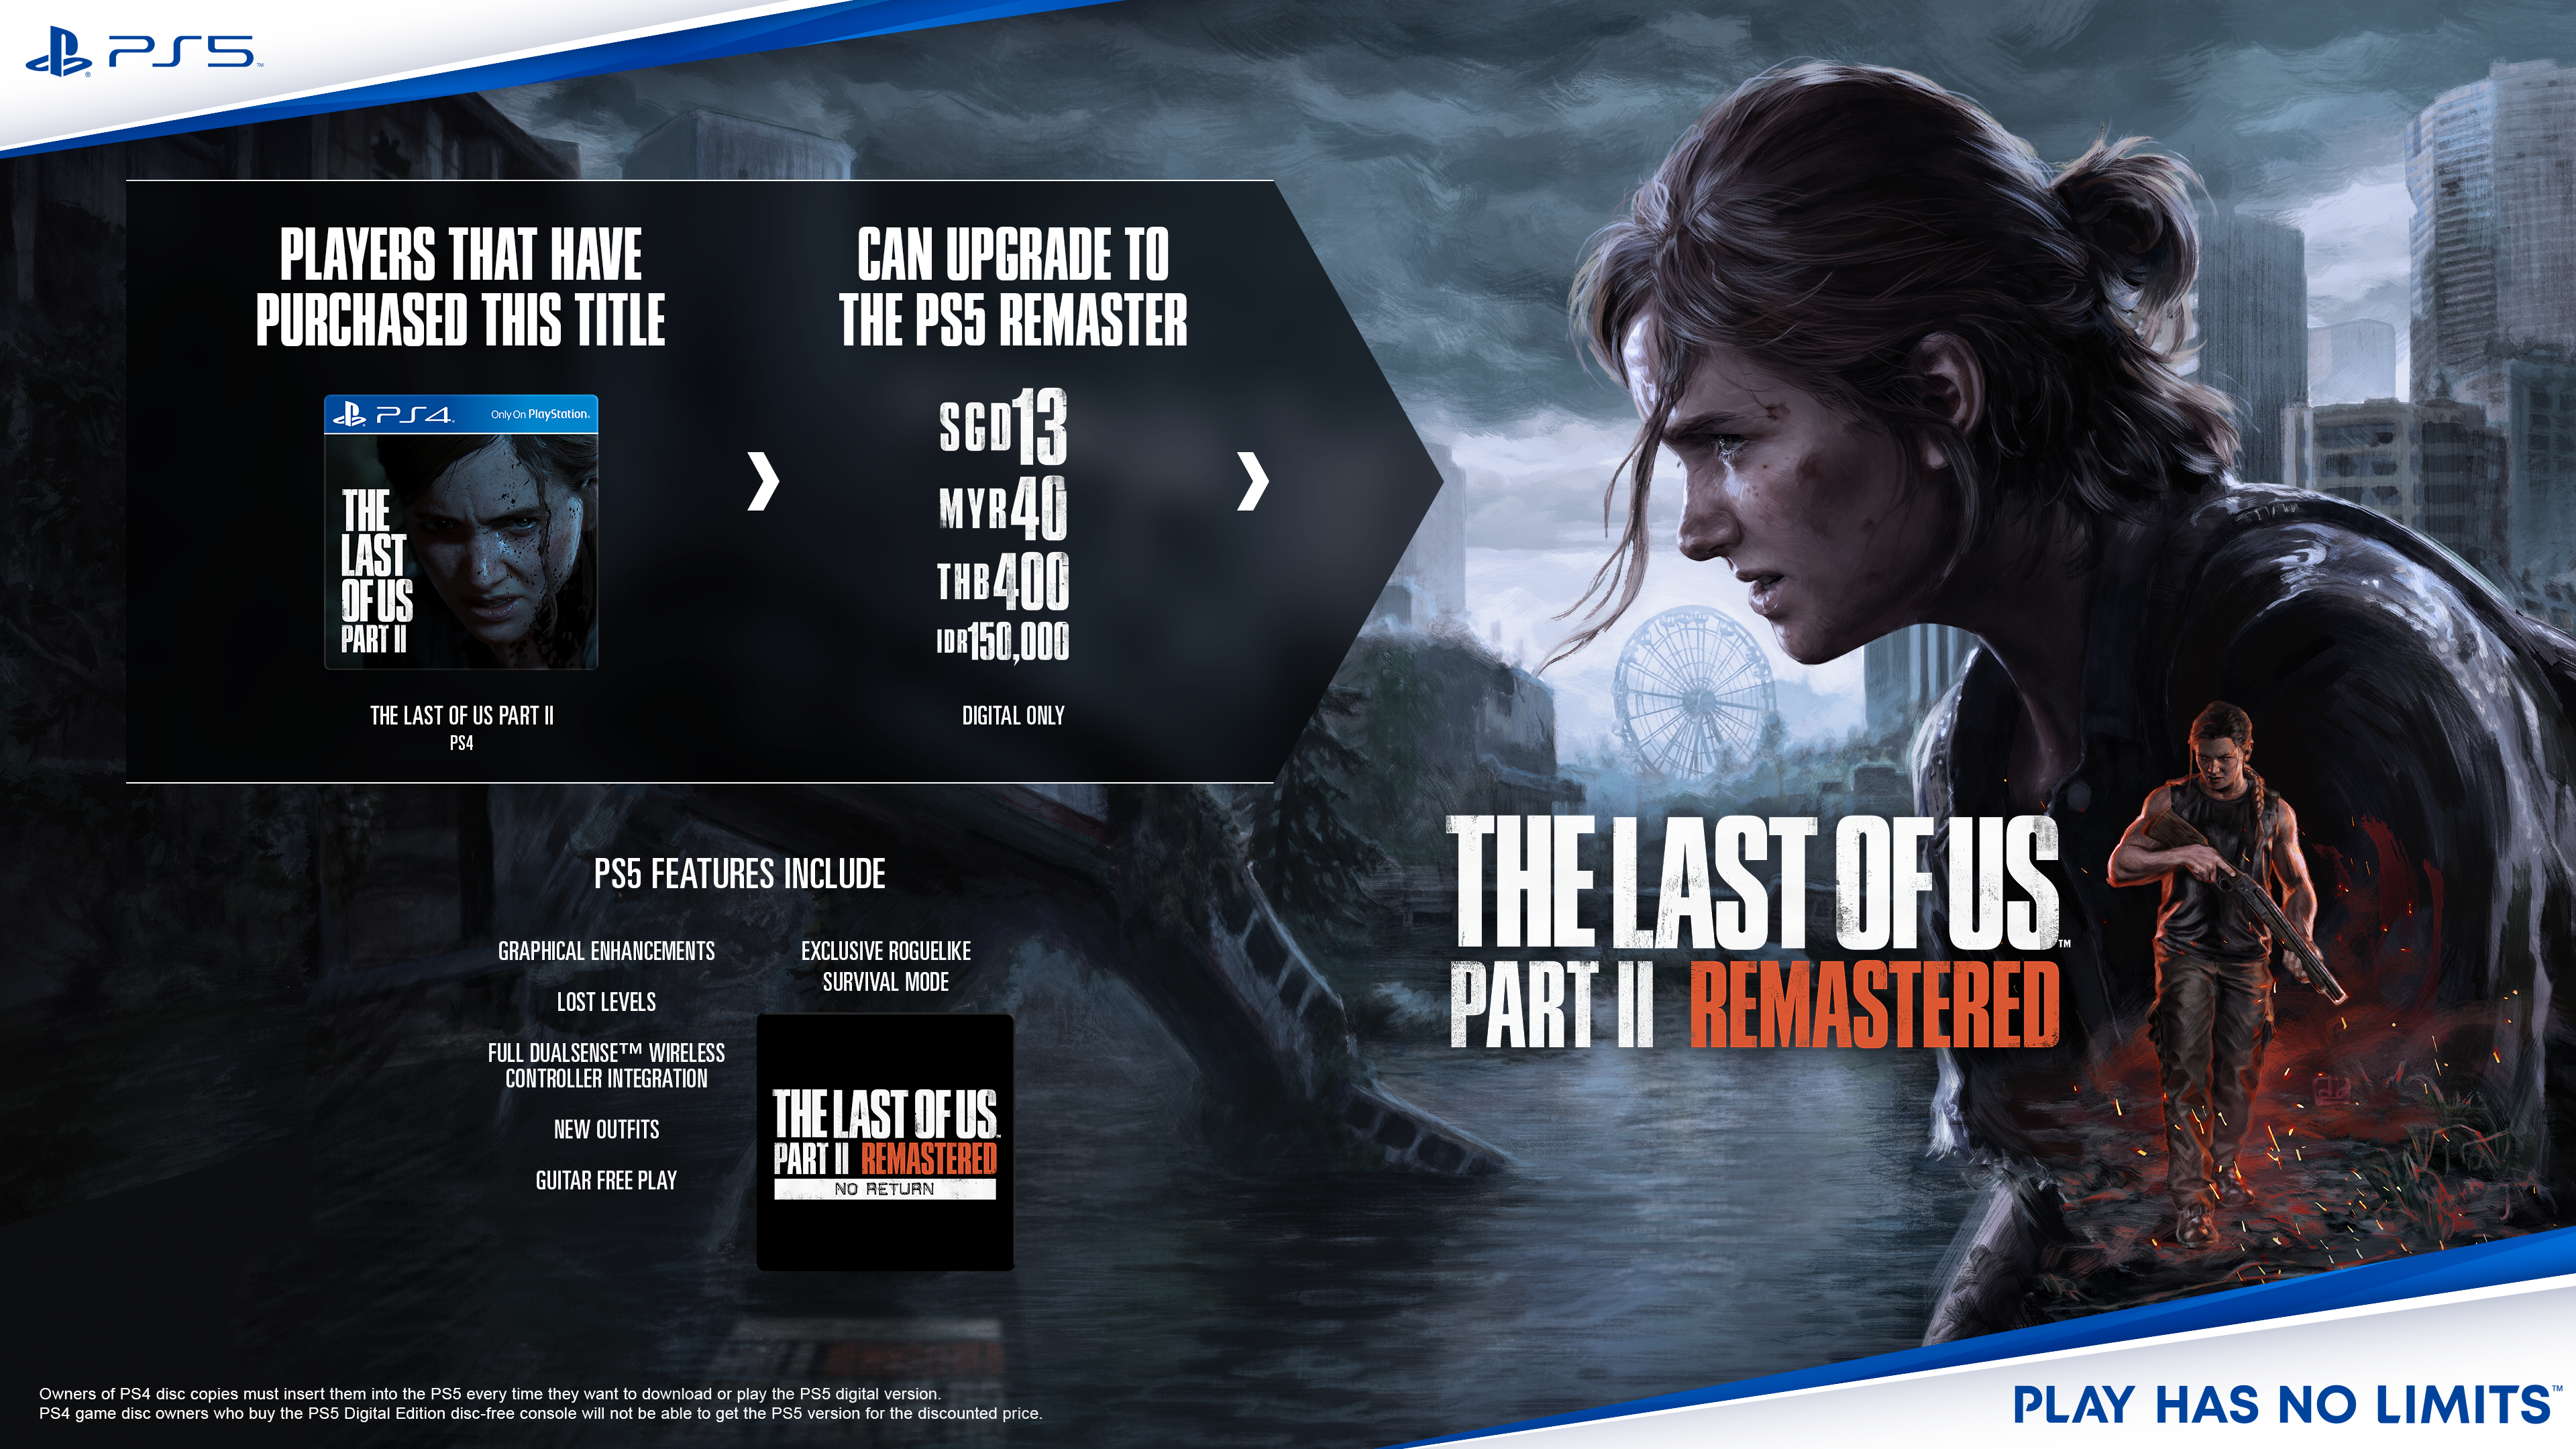 The Last of Us Part II 2 - PS4 / PlayStation 4 (PS5 Upgrade) NEW - FREE  SHIPPING 711719519102